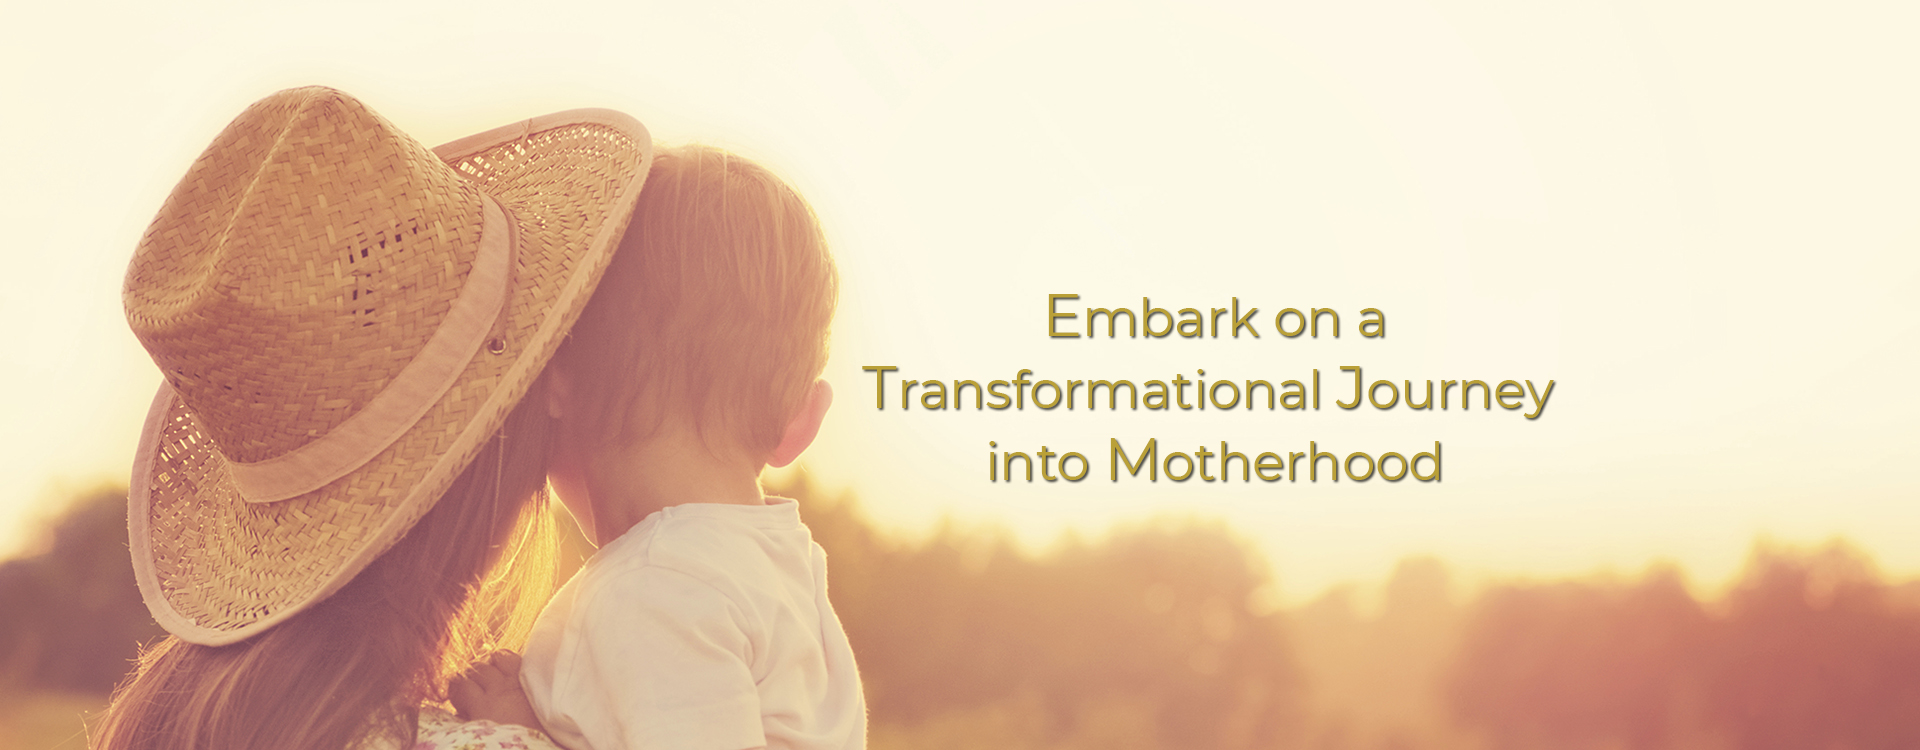 Embark on a Transformational Journey